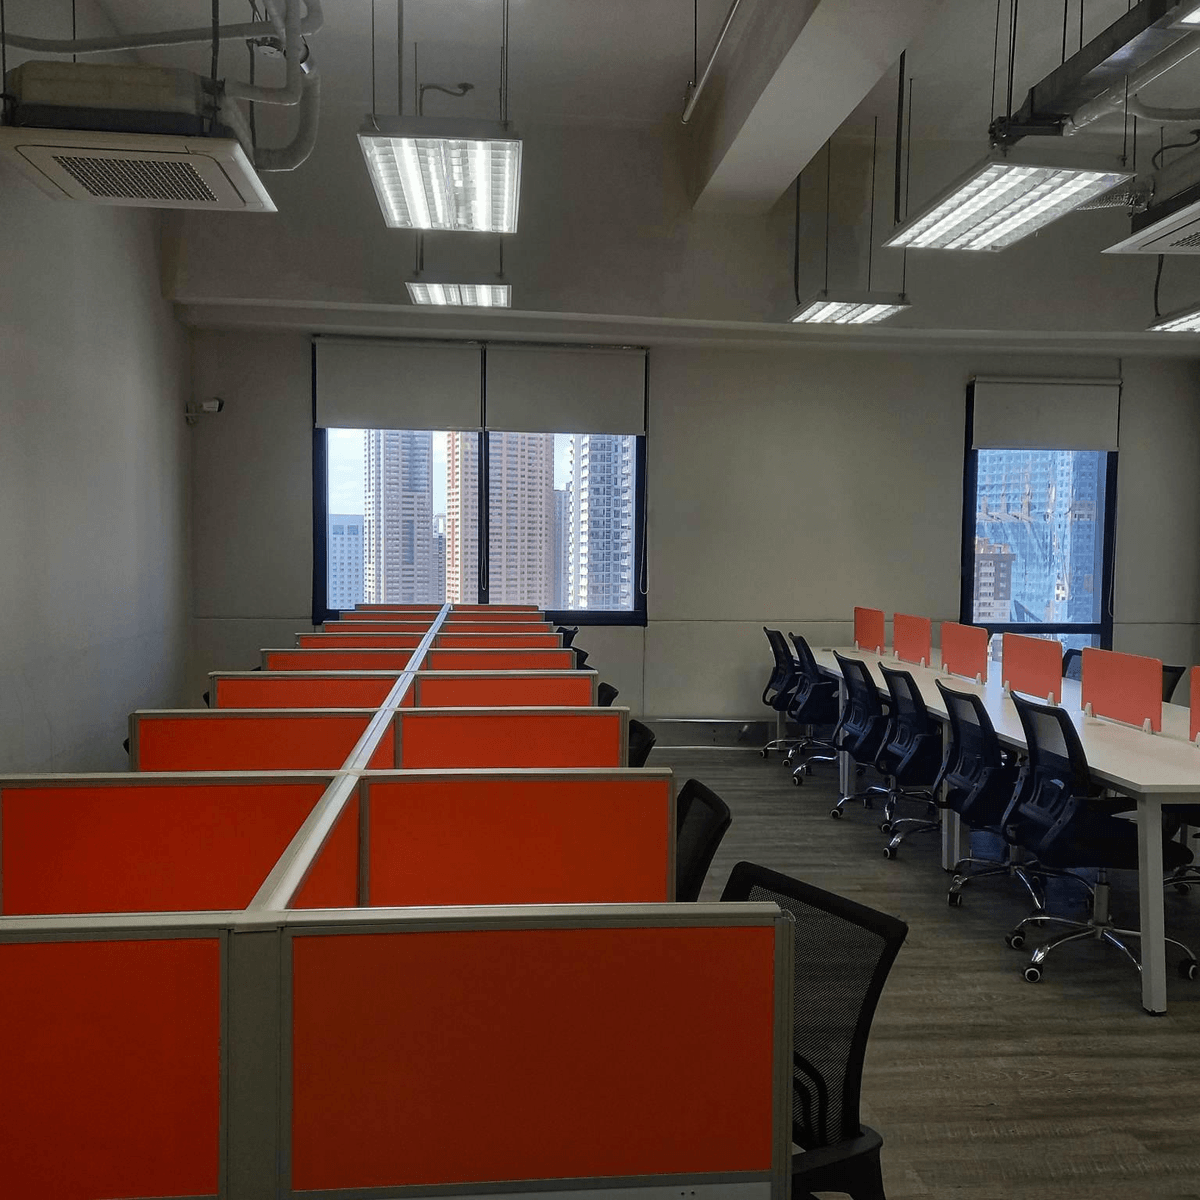 For Rent Lease BPO Office Space Mandaluyong City Manila 542sqm